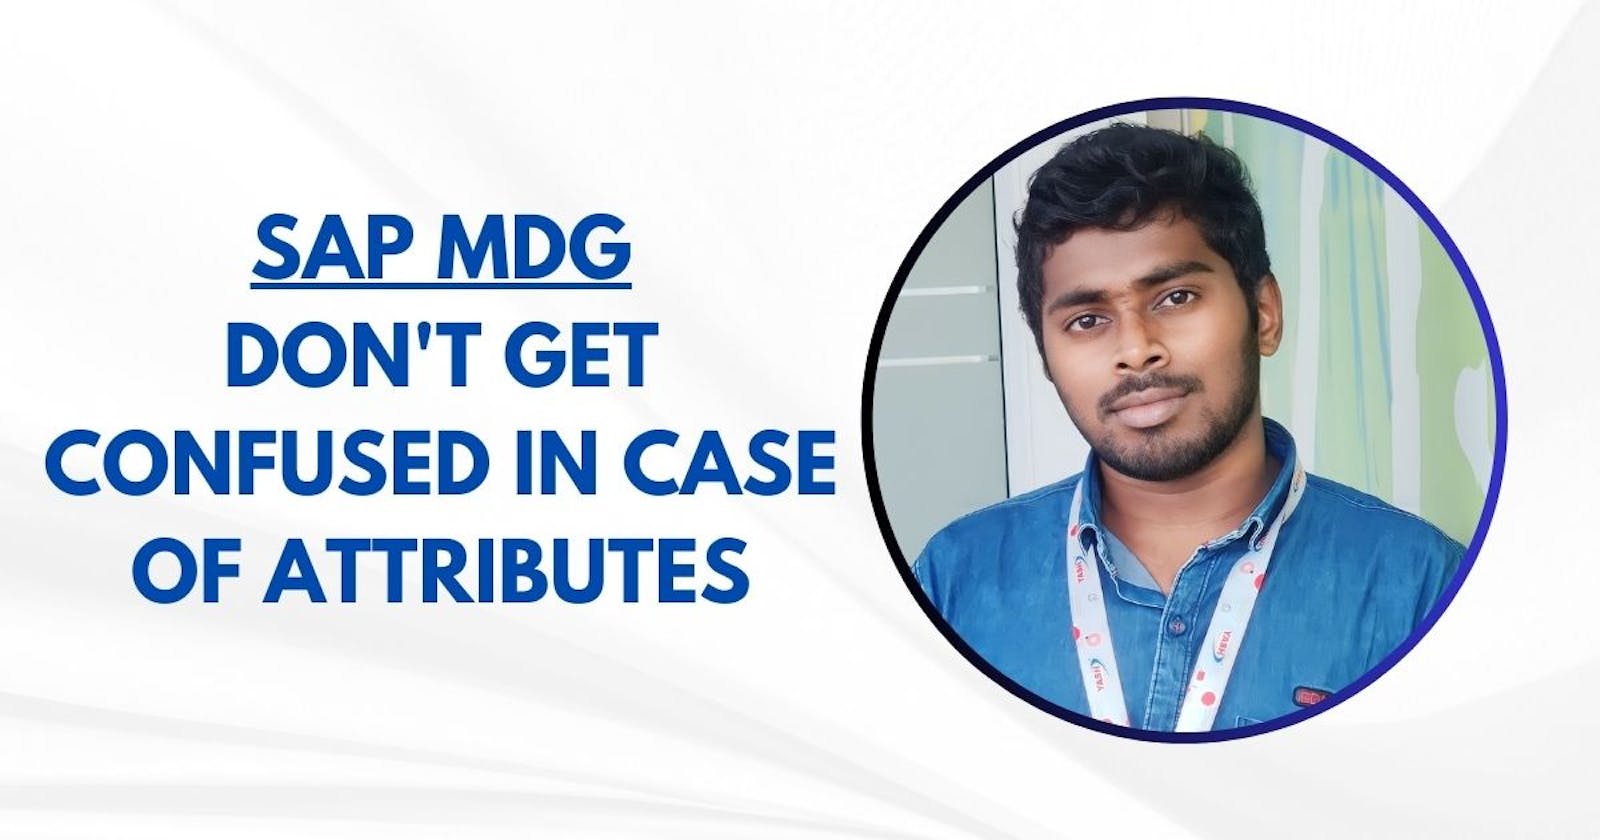 SAP MDG: Don't get confused in case of Attributes.